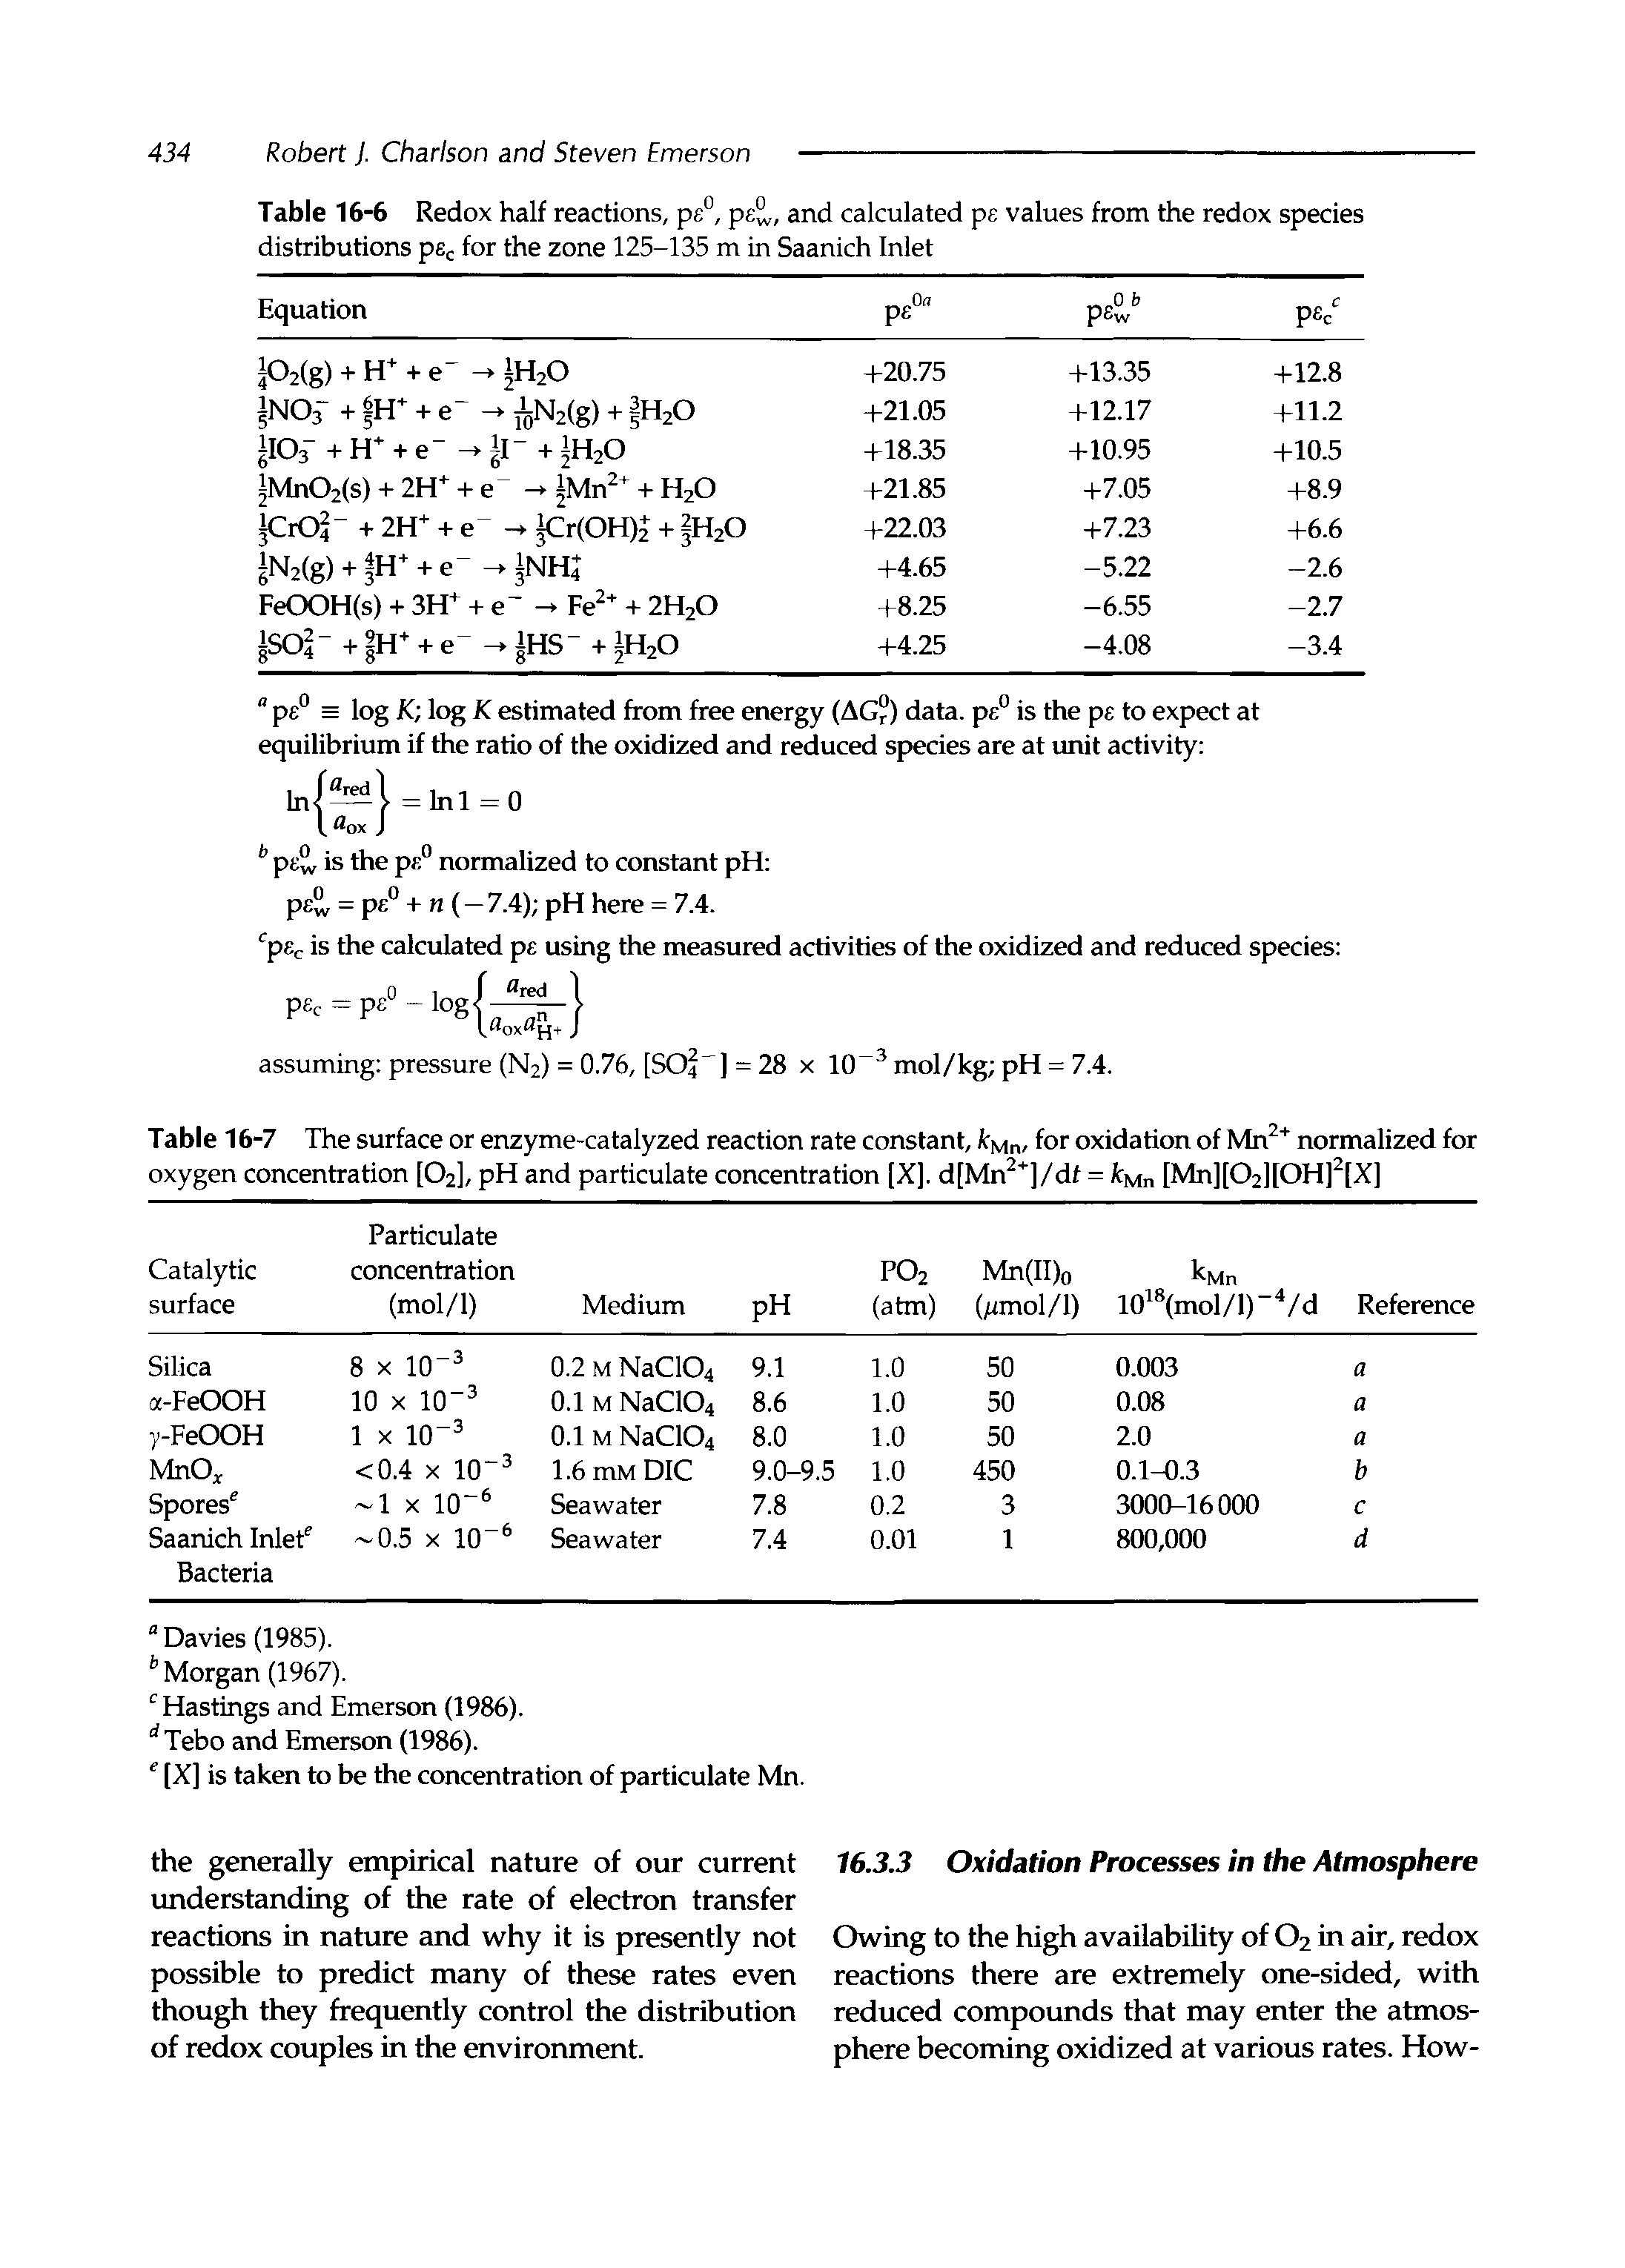 Table 16-7 The surface or enzyme-catalyzed reaction rate constant, Mn/ for oxidation of Mn normalized for oxygen concentration [O2], pH and particulate concentration [X]. d[Mn ]/dt = Mn [Mn][02][0H] [X]...